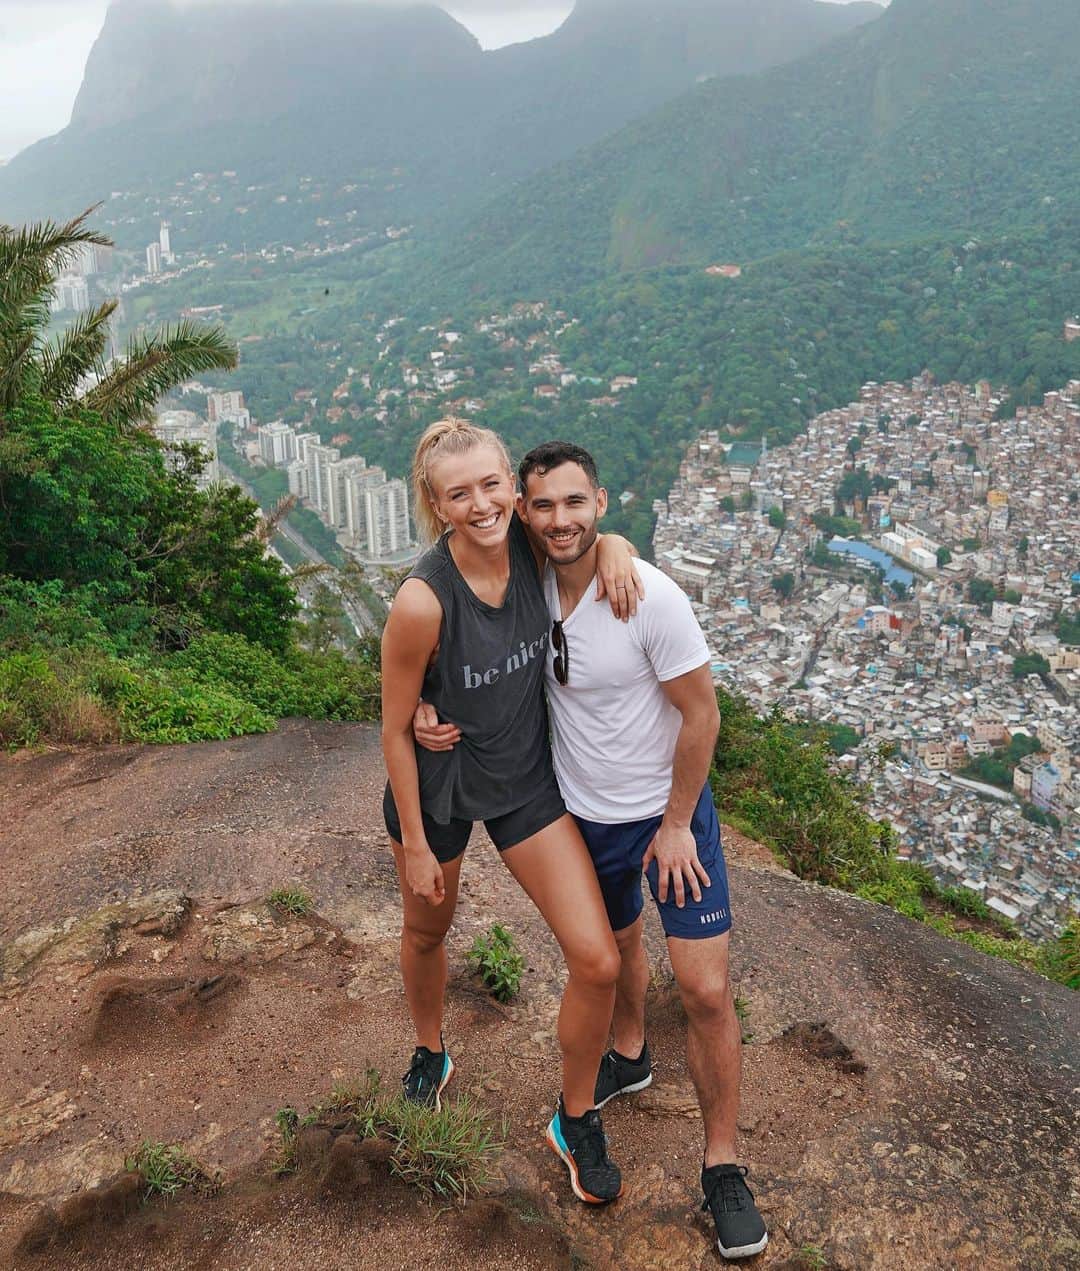 Zanna Van Dijkさんのインスタグラム写真 - (Zanna Van DijkInstagram)「My favourite hiking buddy 🥰❤️ Rio is such an incredibly diverse city - you have sky scrapers, mountains and the ocean all on your doorstep 🌃  Here’s @antonymaule and I’s favourite Rio tips, tricks & experiences. Click like & save so you can use this later ✅ ➡️ @riobybike cycling tours - the perfect way to get to grips with the city 🚲 ➡️ Eat the most EPIC vegan food at @tevavegetal (don’t miss the apple pie!) 🌱 ➡️ Do a hiking trip with @rafaelcaja_expedition. We loved the Dois Irmãos trail but other popular hikes are Pedro Bonita, Pedra De Gávea, Pedra do Telegrapho & Pico de Tijuca 🥾 ➡️ Fill up on fresh açai on every street corner 😋 ➡️ Do as the locals do - run along Copocabana or Ipanema beach at sunset 🌇 ➡️ Go paragliding with @Querovoar021, get an adrenaline rush & see Rio from the sky 🦅 ➡️ See the largest mural by a single person at Etnias 🎨 ➡️ Train with the locals at @cfp9 🏋🏼‍♀️ ➡️ Get off the beaten path - explore Grumari & it’s quiet but stunning beaches & trails ⛰ ➡️ Tick off the tourist spots: Christ The Redeemer, Sugarloaf Mountain, Escadaria Selaron & the Botanical Gardens 🌺 ➡️ Stay safe. Keep your wits about you and use common sense. No flashy jewellery, clothing or tech 👮‍♀️ What’s your Rio tip?! Let’s make this post an awesome resource for those travelling to this beautiful city 🇧🇷 #riodejaneiro #riotravel #travelblogger #exploremore #hikinggirl #getoutdoors #hikingcouple #travelcouple #wanderlust #greatoutdoors #hikingtrip #riohiking」11月14日 19時04分 - zannavandijk